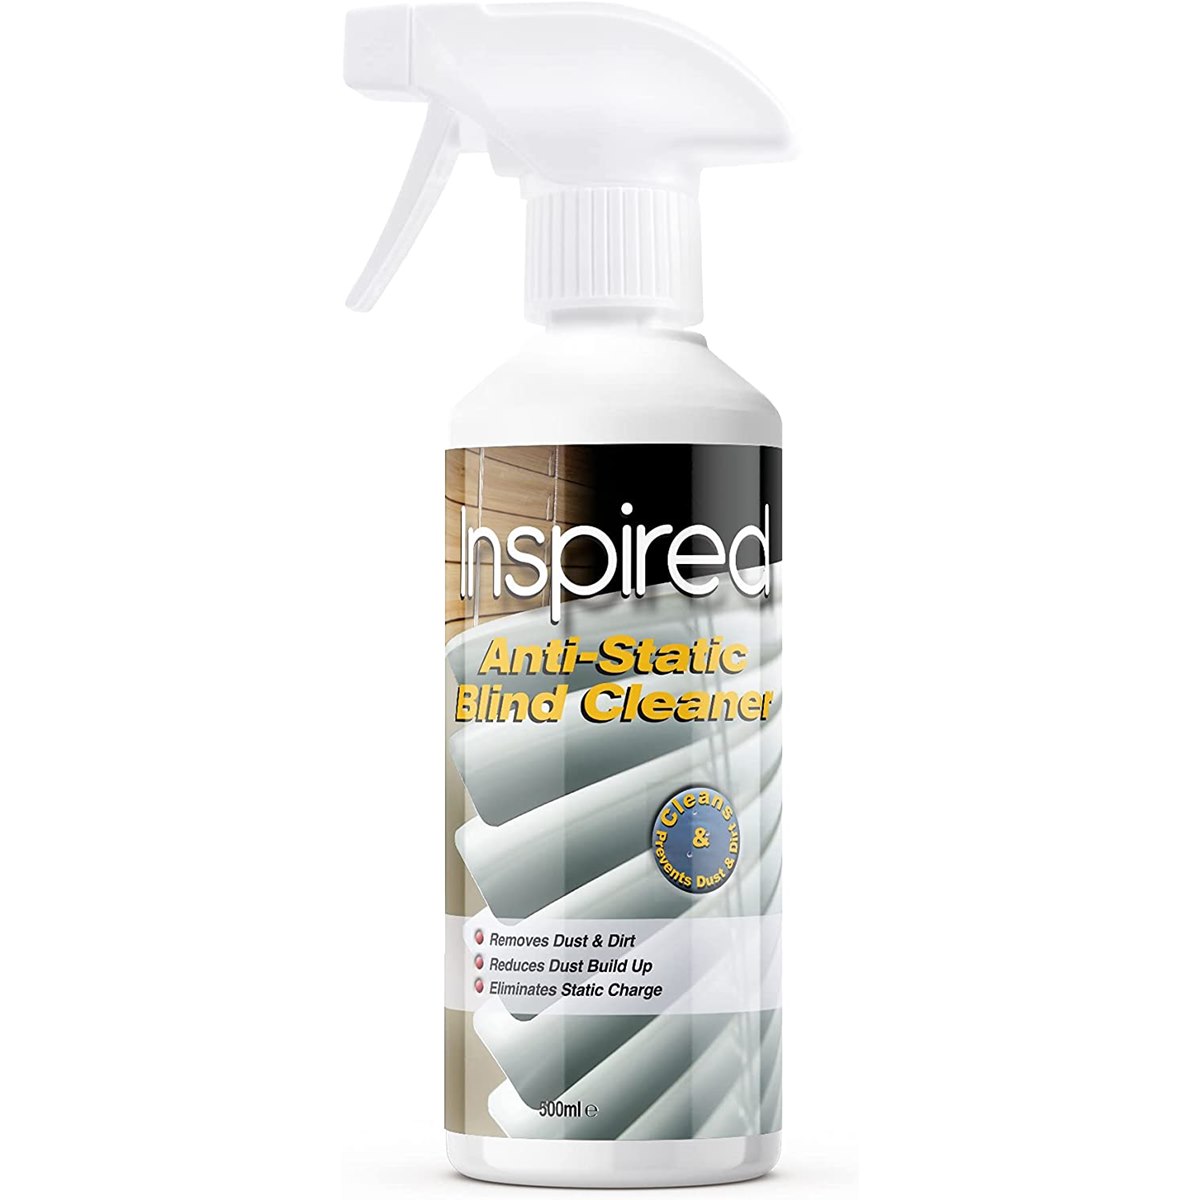 Inspired Anti-Static Venetian Blind and Television Computer Cleaner Spray 500ml